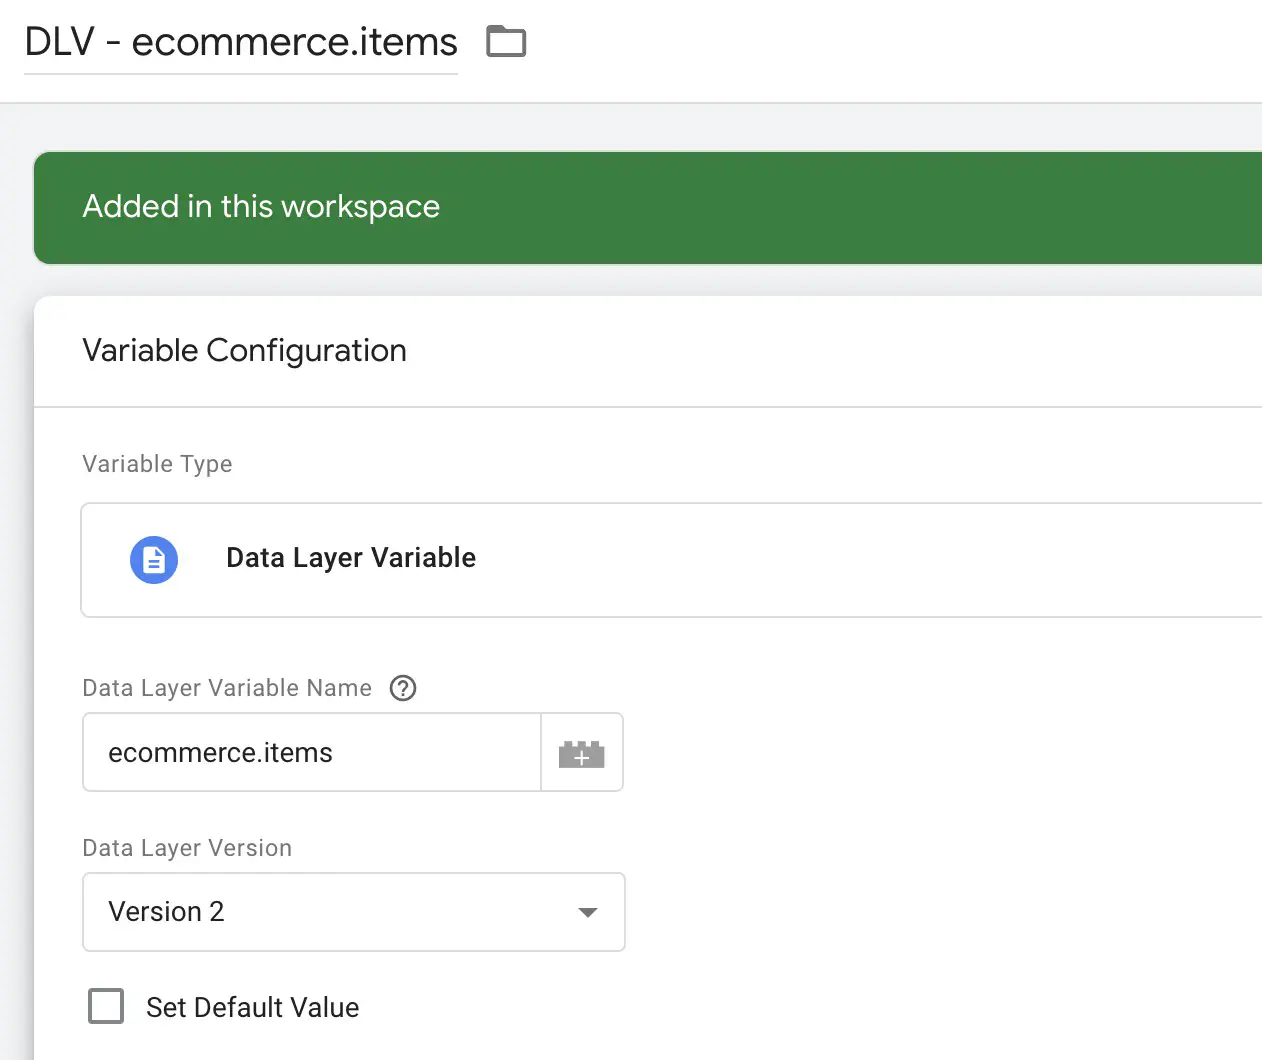 Creating data layer variable ecommerce.items